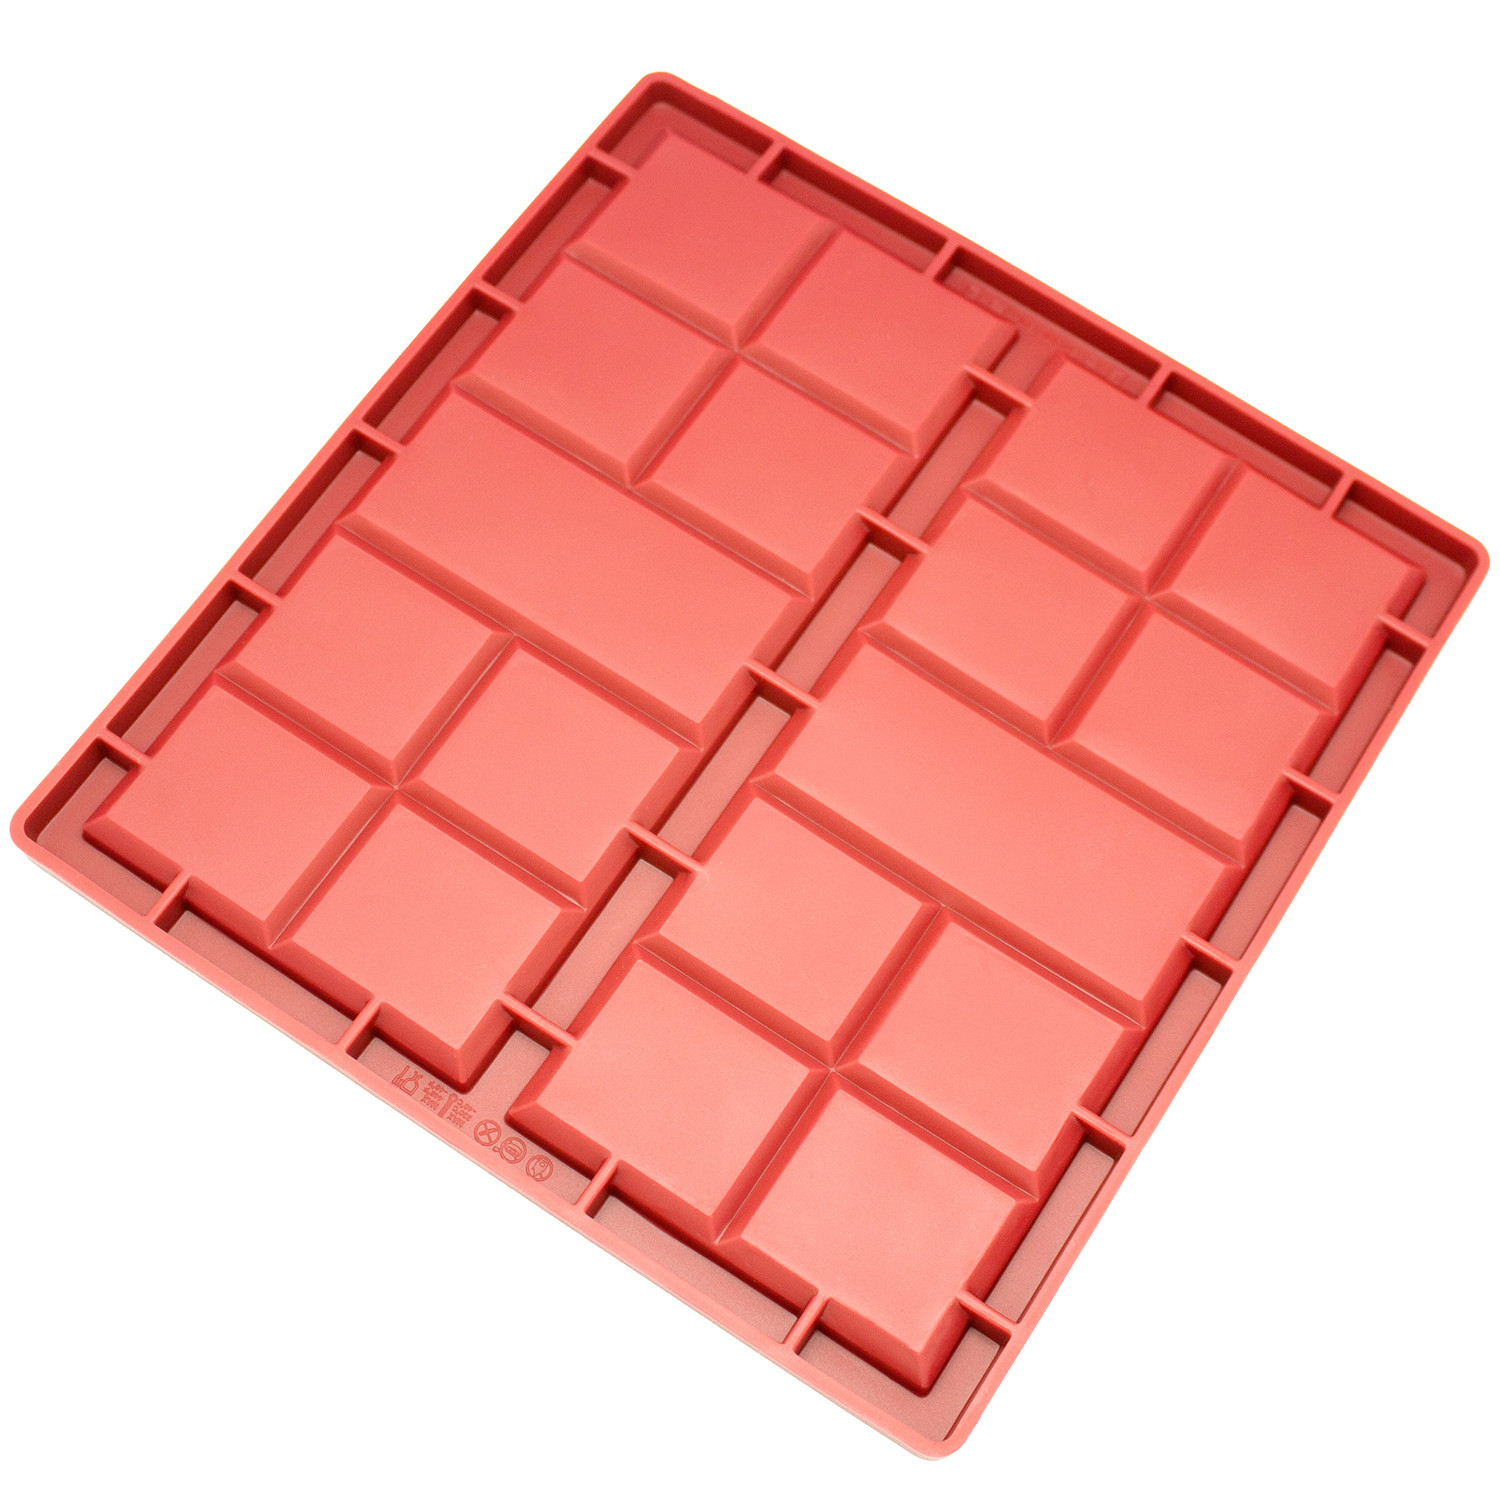 Freshware Silicone Mold, Chocolate Mold for Chocolate Bars, Protein Bars and Energy Bars, Thin, Break-Apart, 2-Cavity